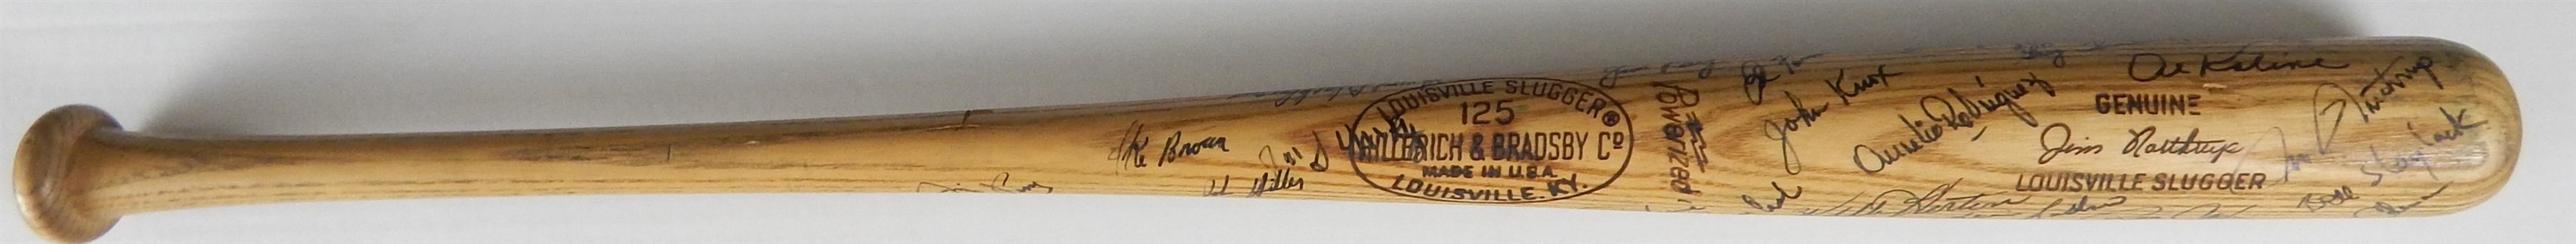 1973 Jim Northrup Detroit Tigers Game Used and Team Signed Bat